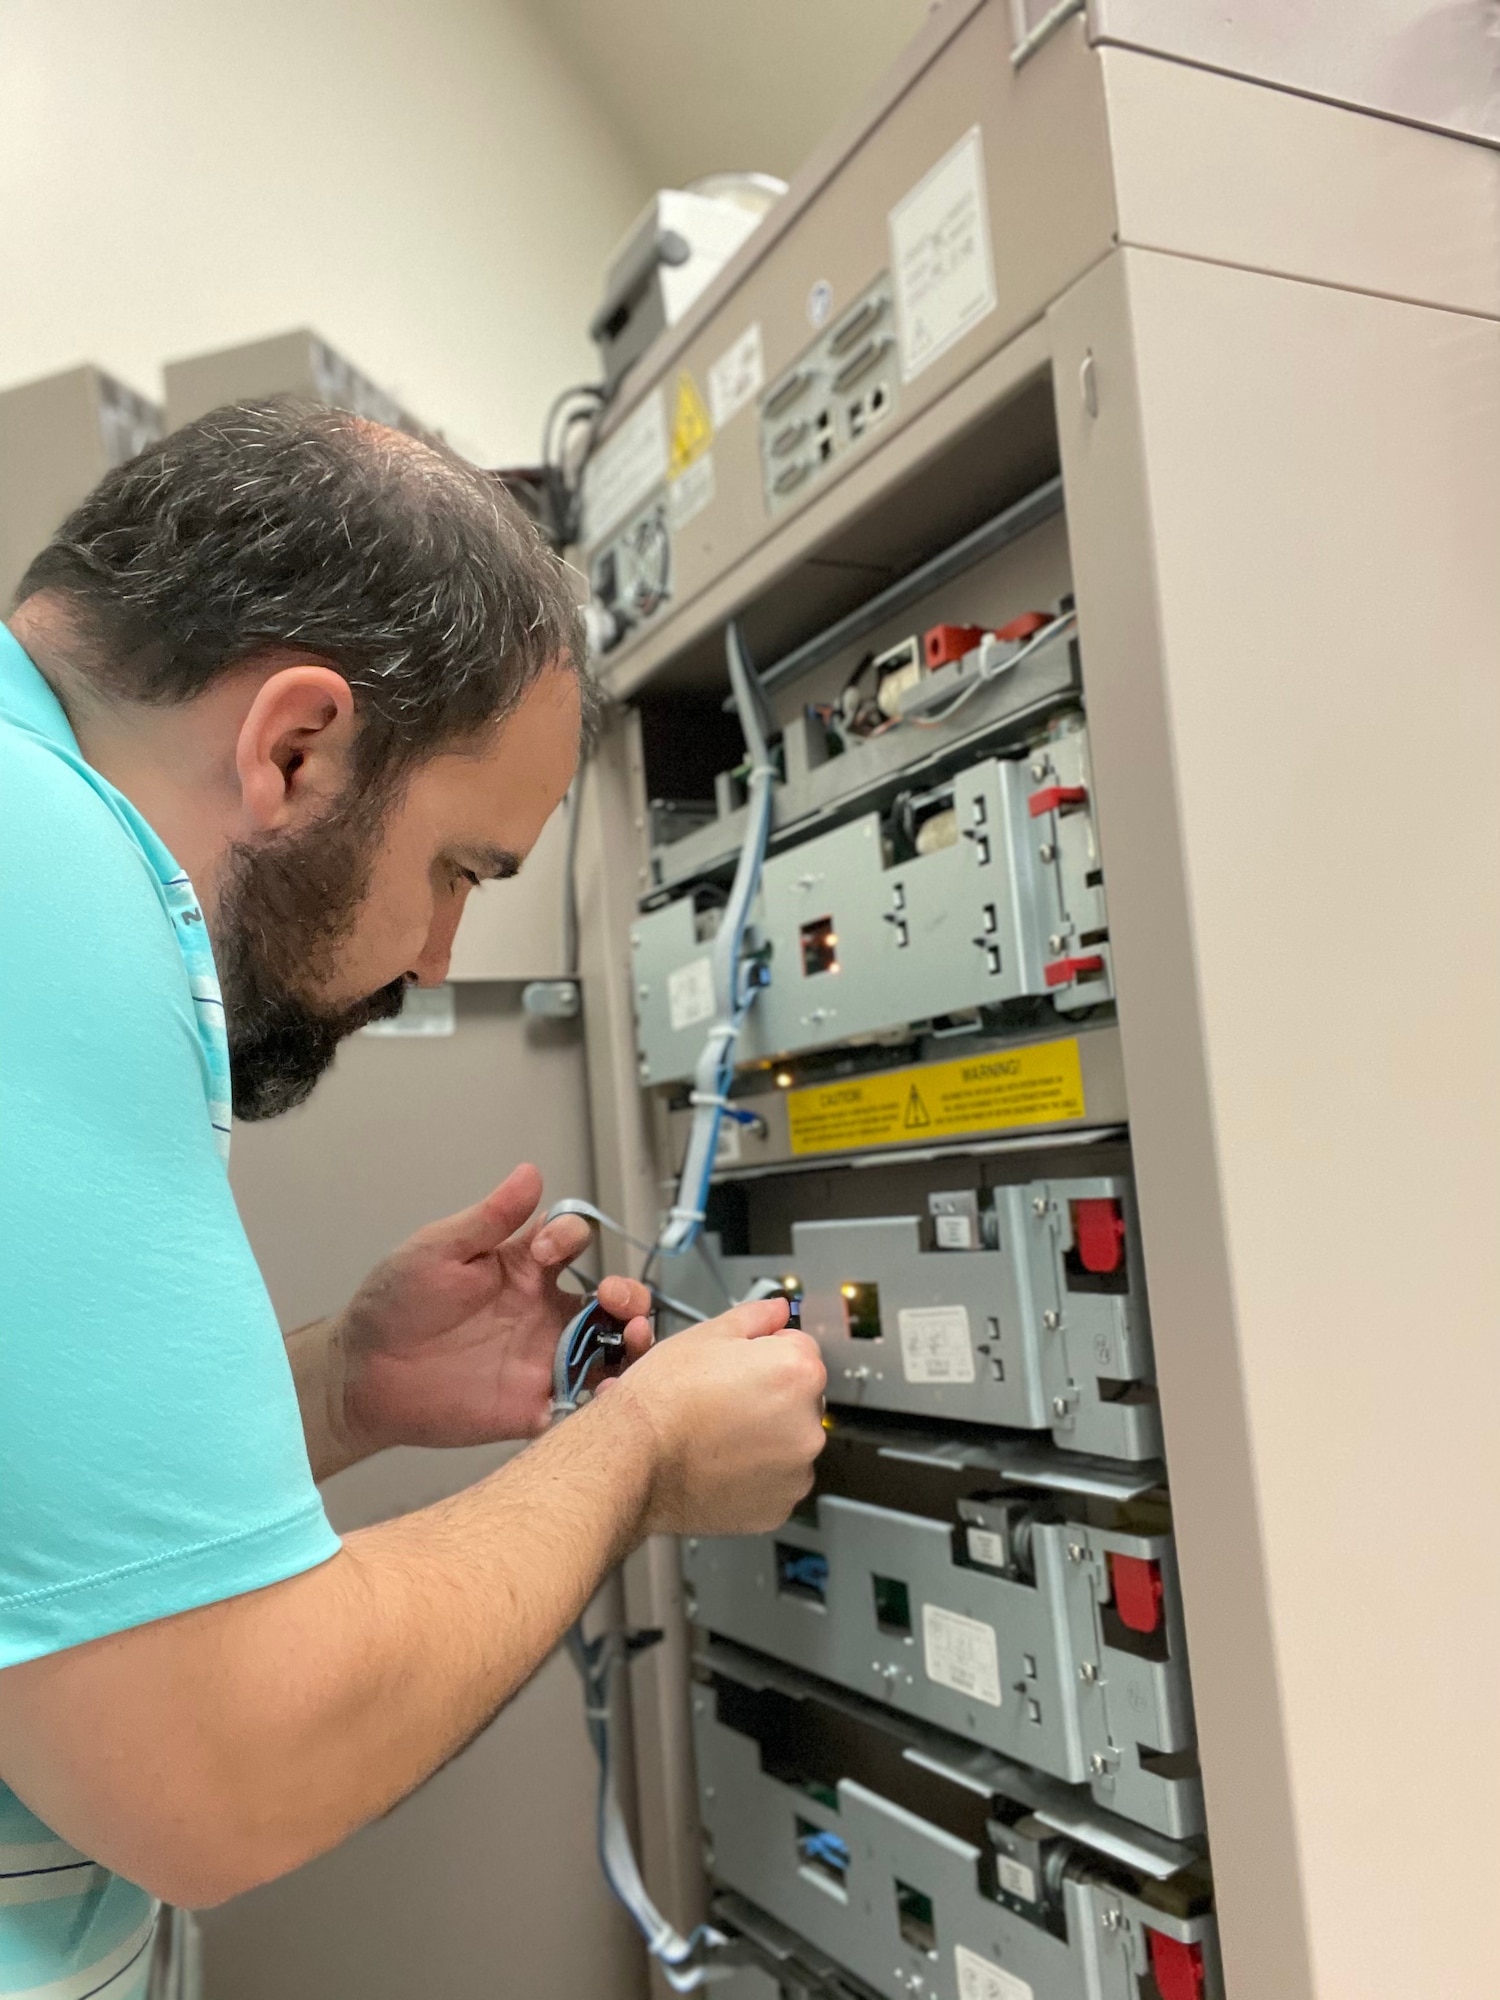 Ryan Porterfield, a pharmacy technician with the 88th Diagnostics and Therapeutics Squadron, works on a Pyxis medical station unit recently at Wright-Patterson Medical Center. The system enables better tracking of controlled medications throughout the hospital. (Contributed photo)